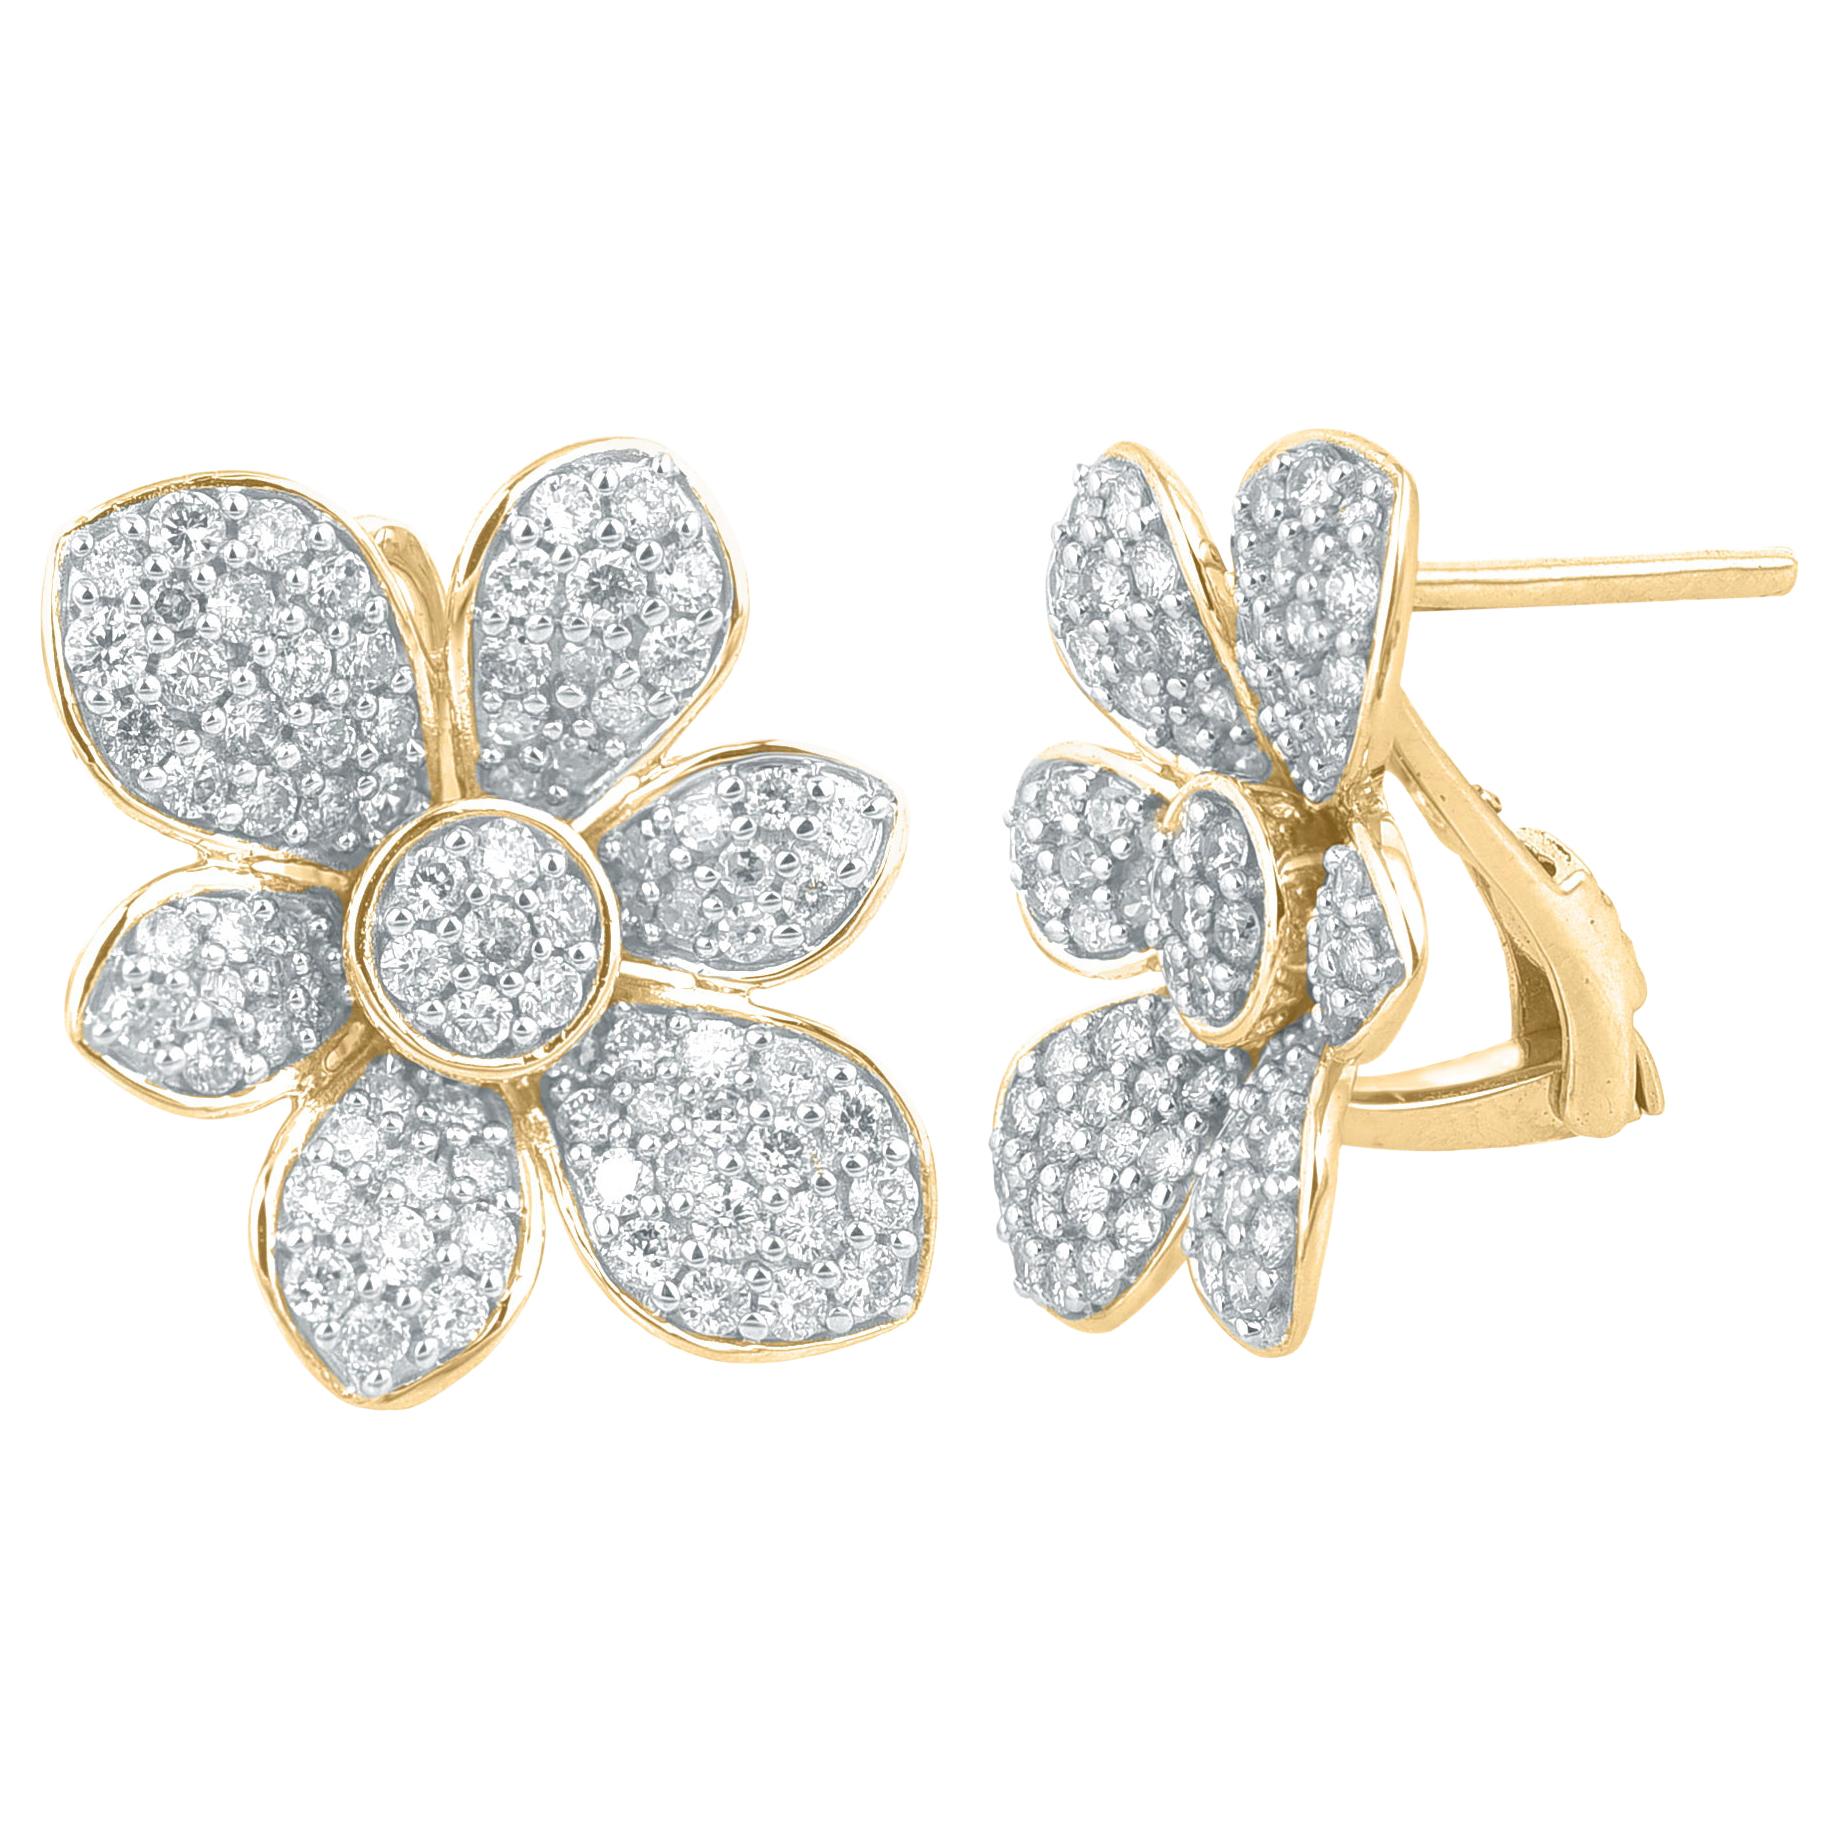 TJD 1.50 Carat Round 14K Yellow Gold Floral Petals Cluster Design Stud Earrings For Sale